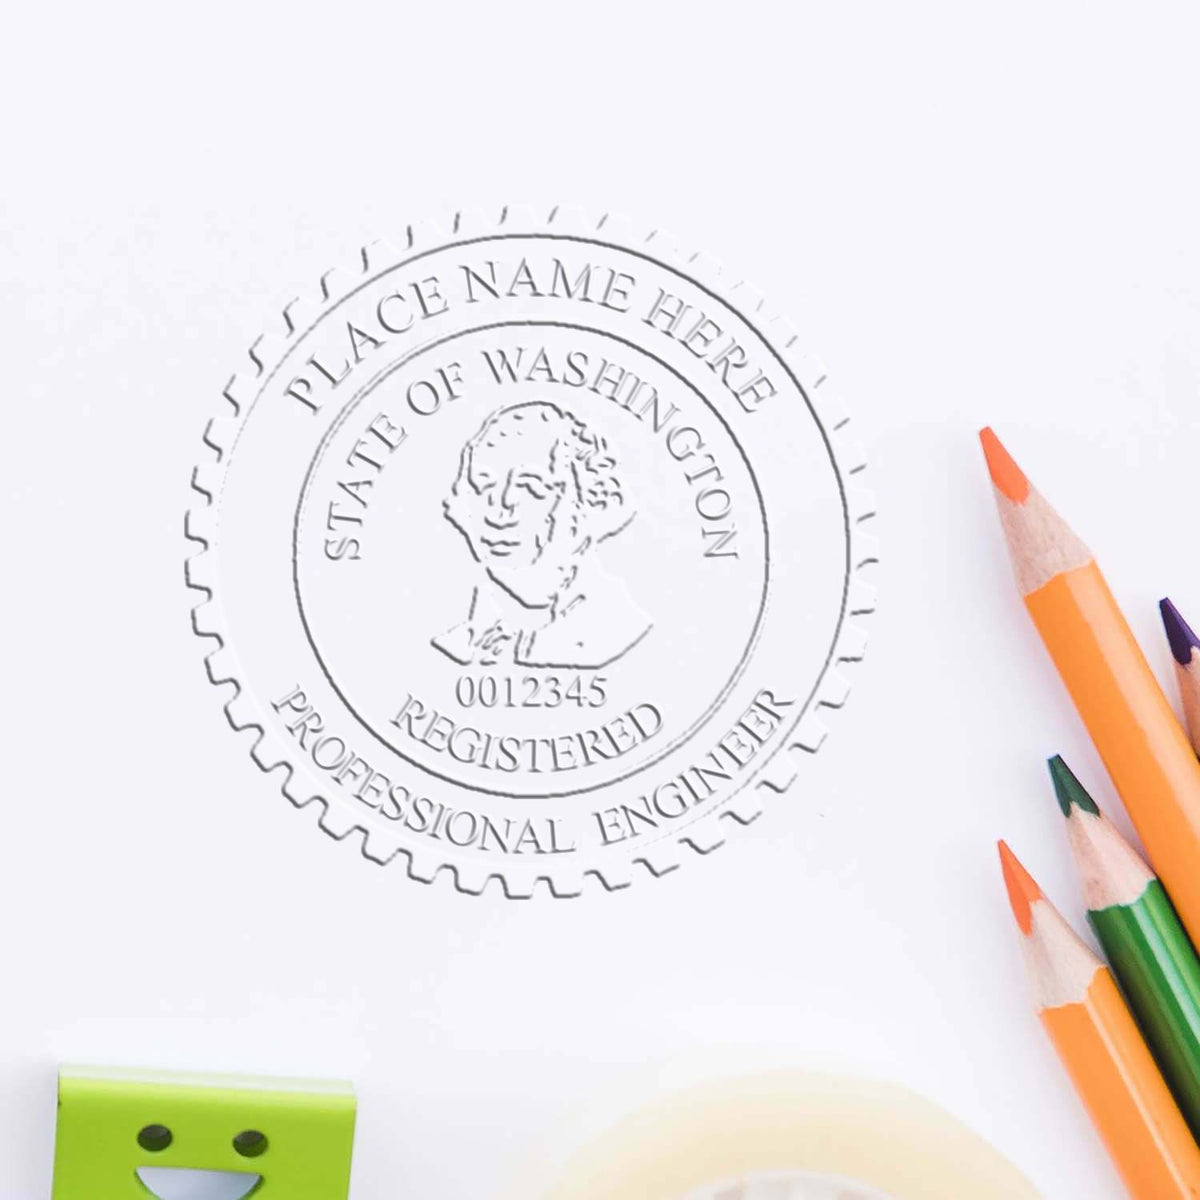 A photograph of the Hybrid Washington Engineer Seal stamp impression reveals a vivid, professional image of the on paper.